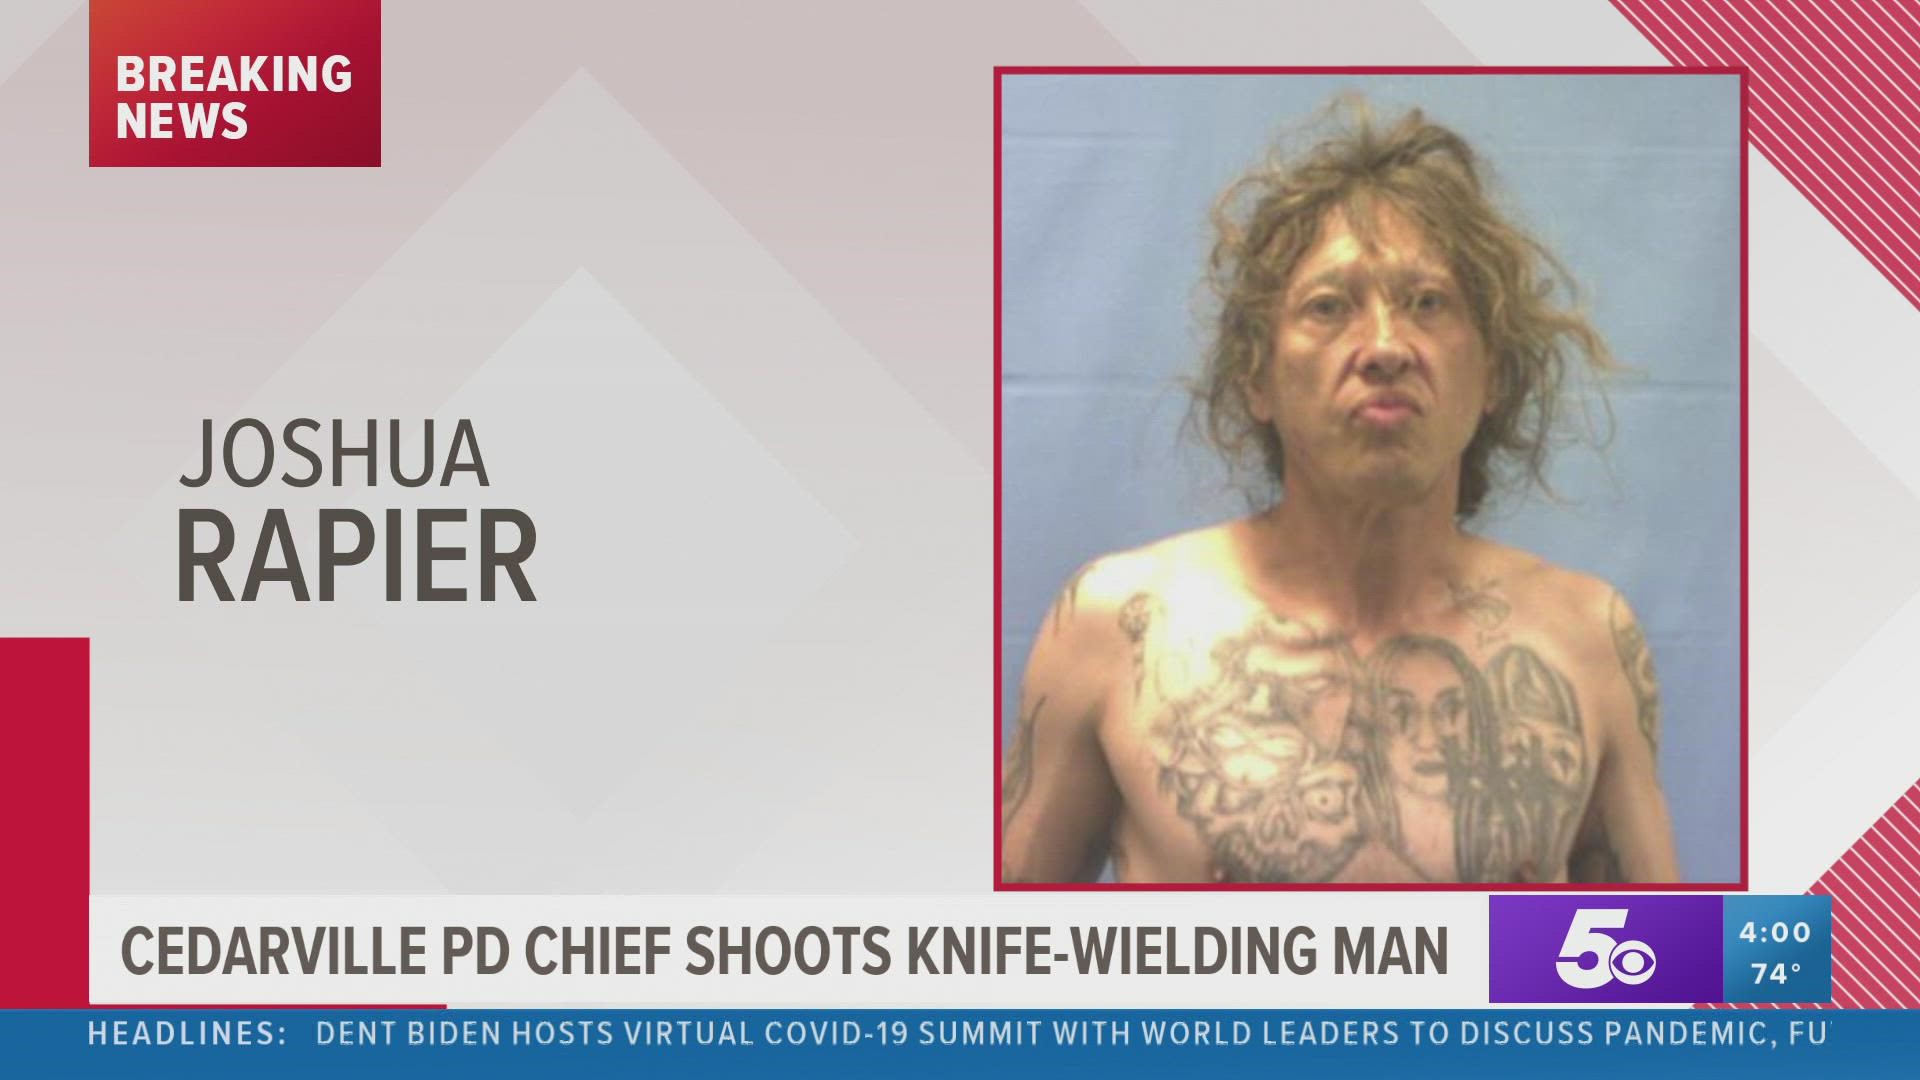 After being shot in one hand, police say the suspect switched the knife to his other hand and continued to lunge at officers.